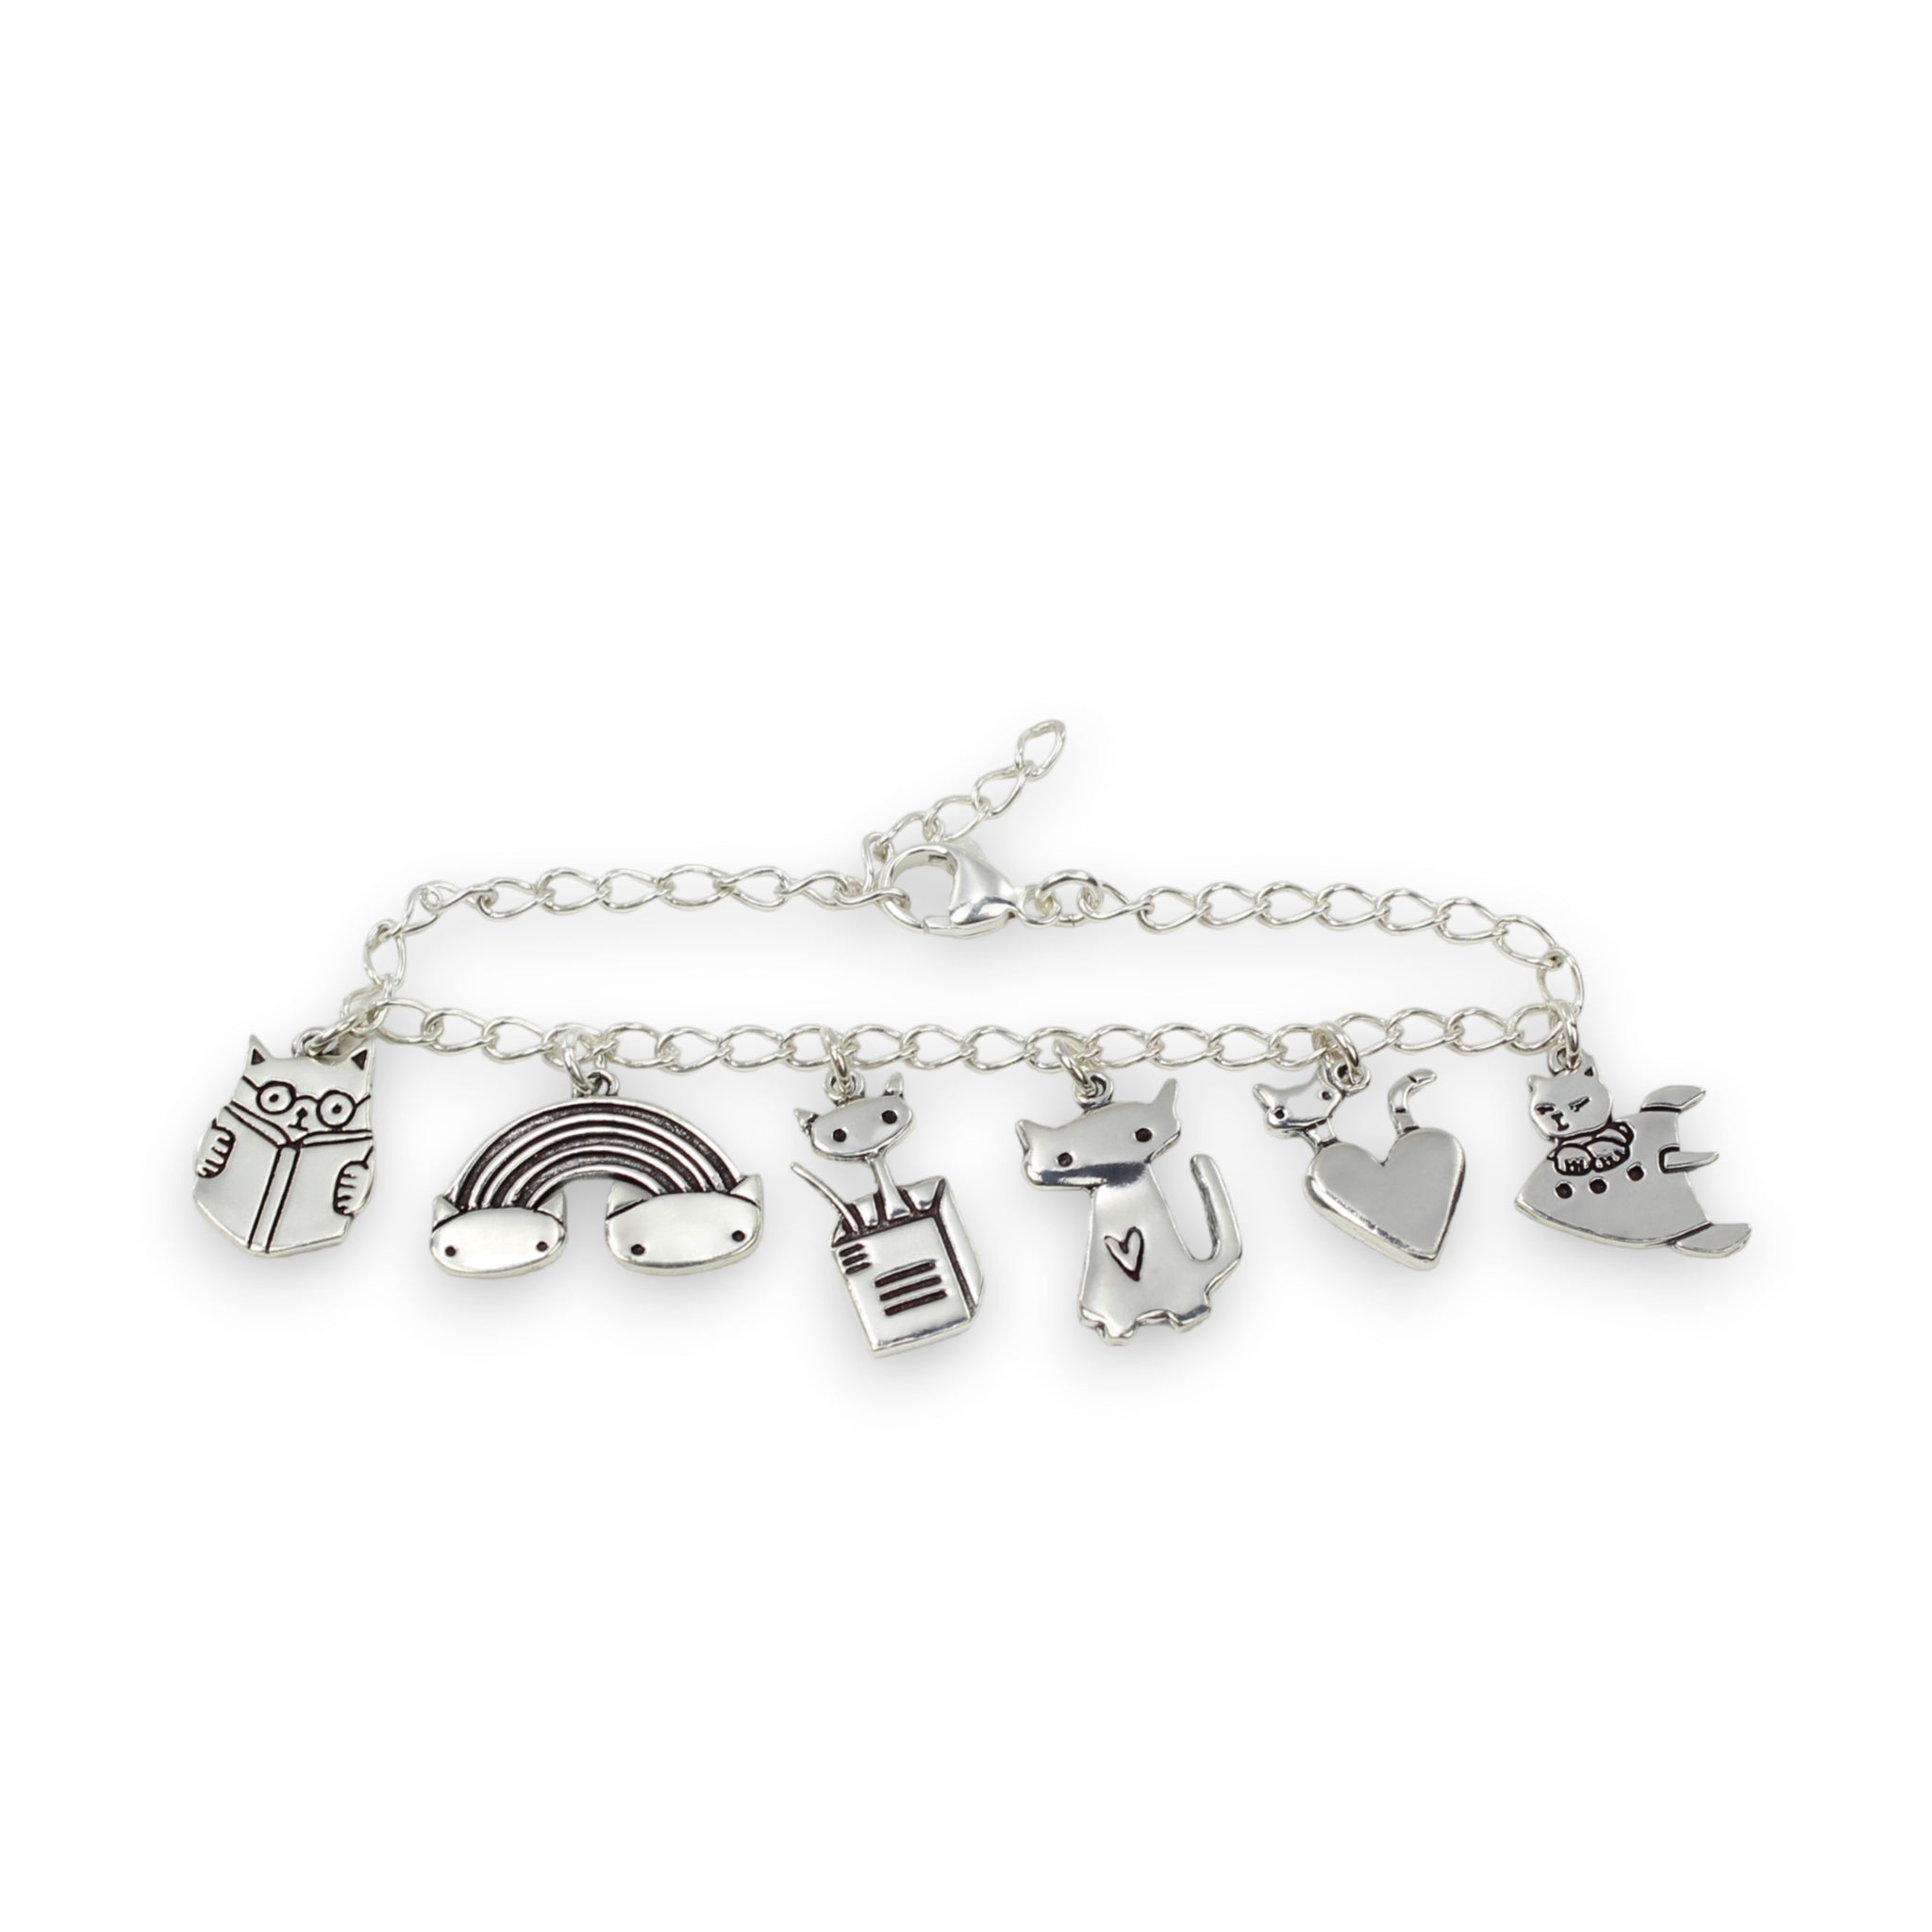 Soufeel Charm Bracelet - Discounted Sterling Silver Charms